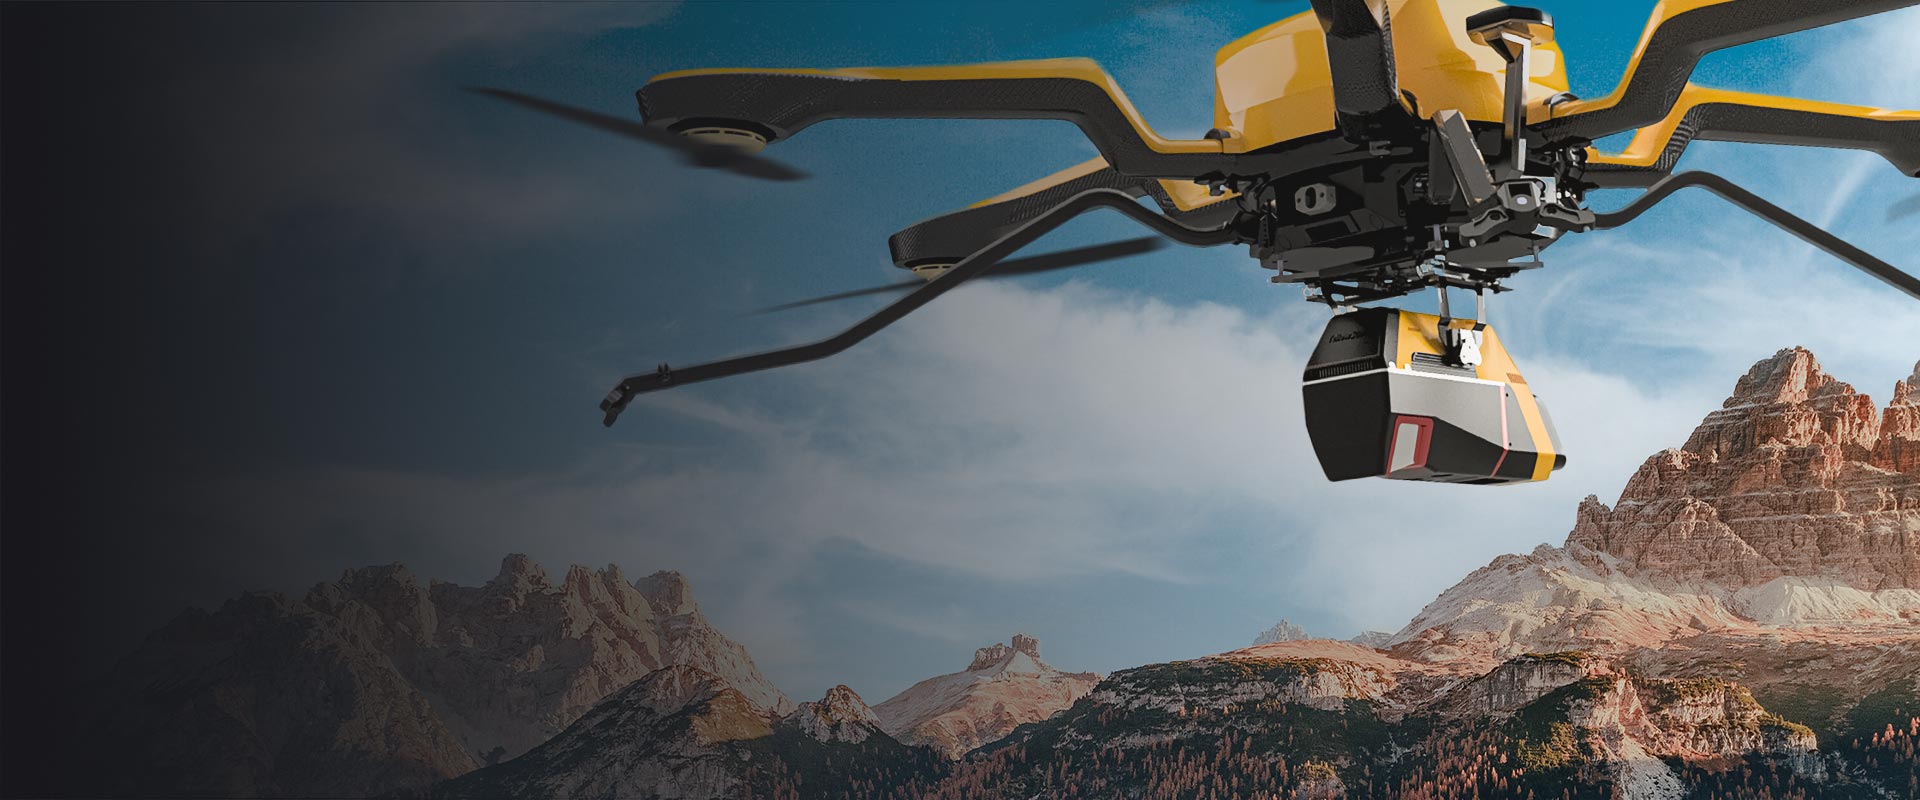 YellowScan Voyager lidar system mounted on Acecore Noa drone